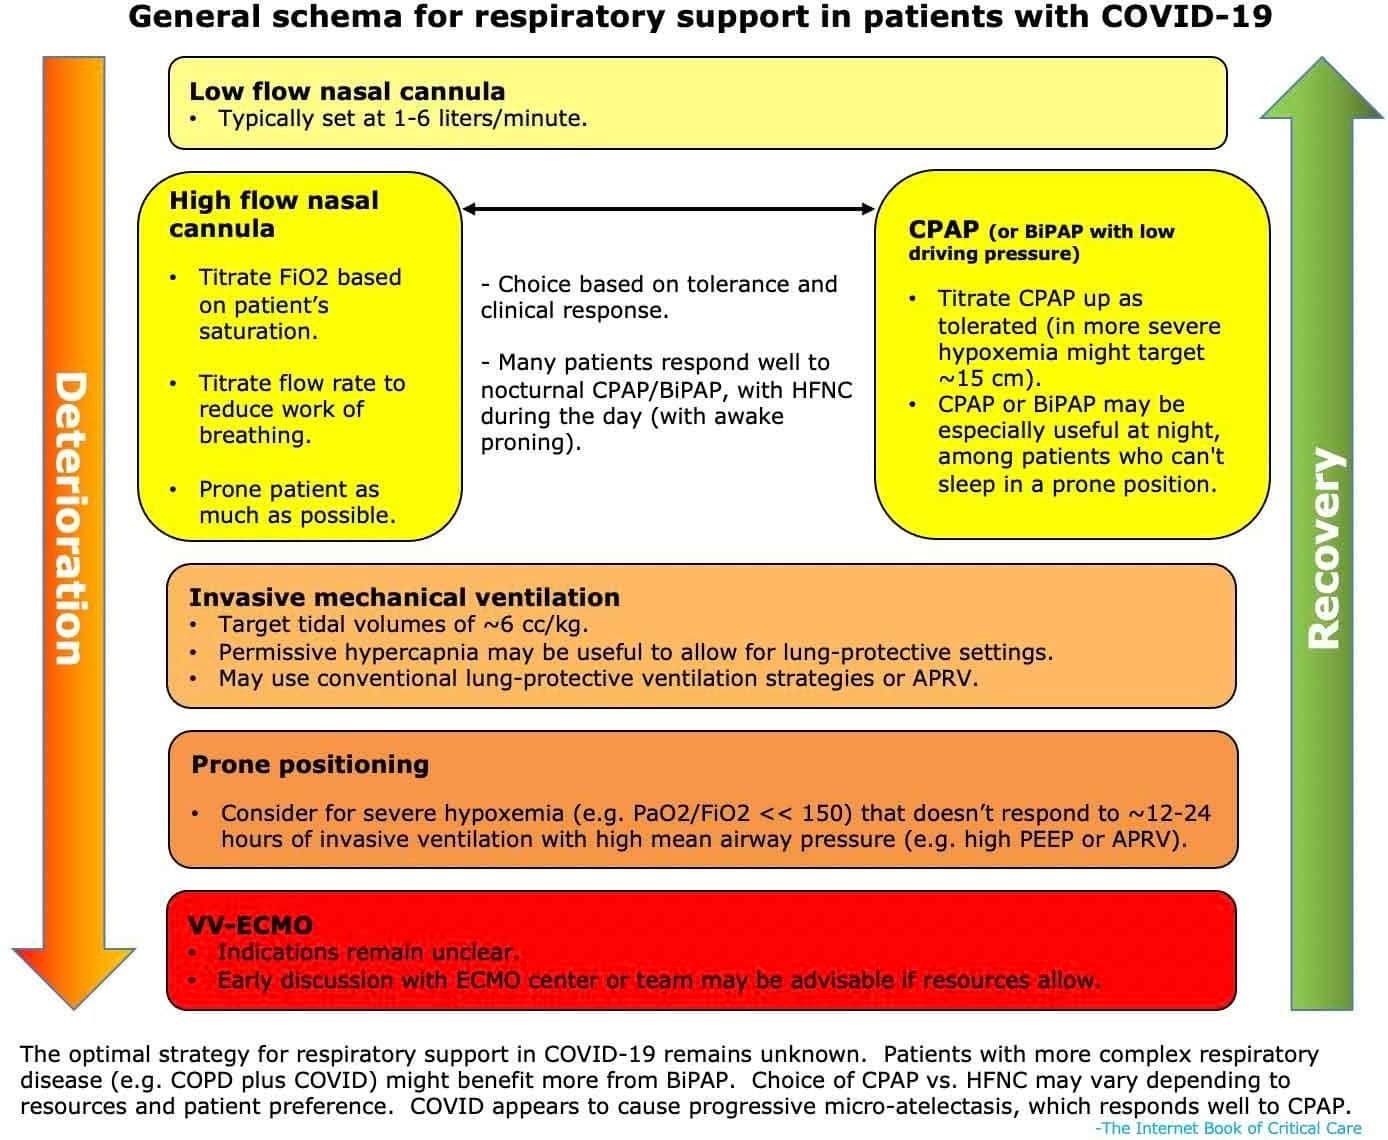 General Schema for Respiratory Support in Patients with COVID-19